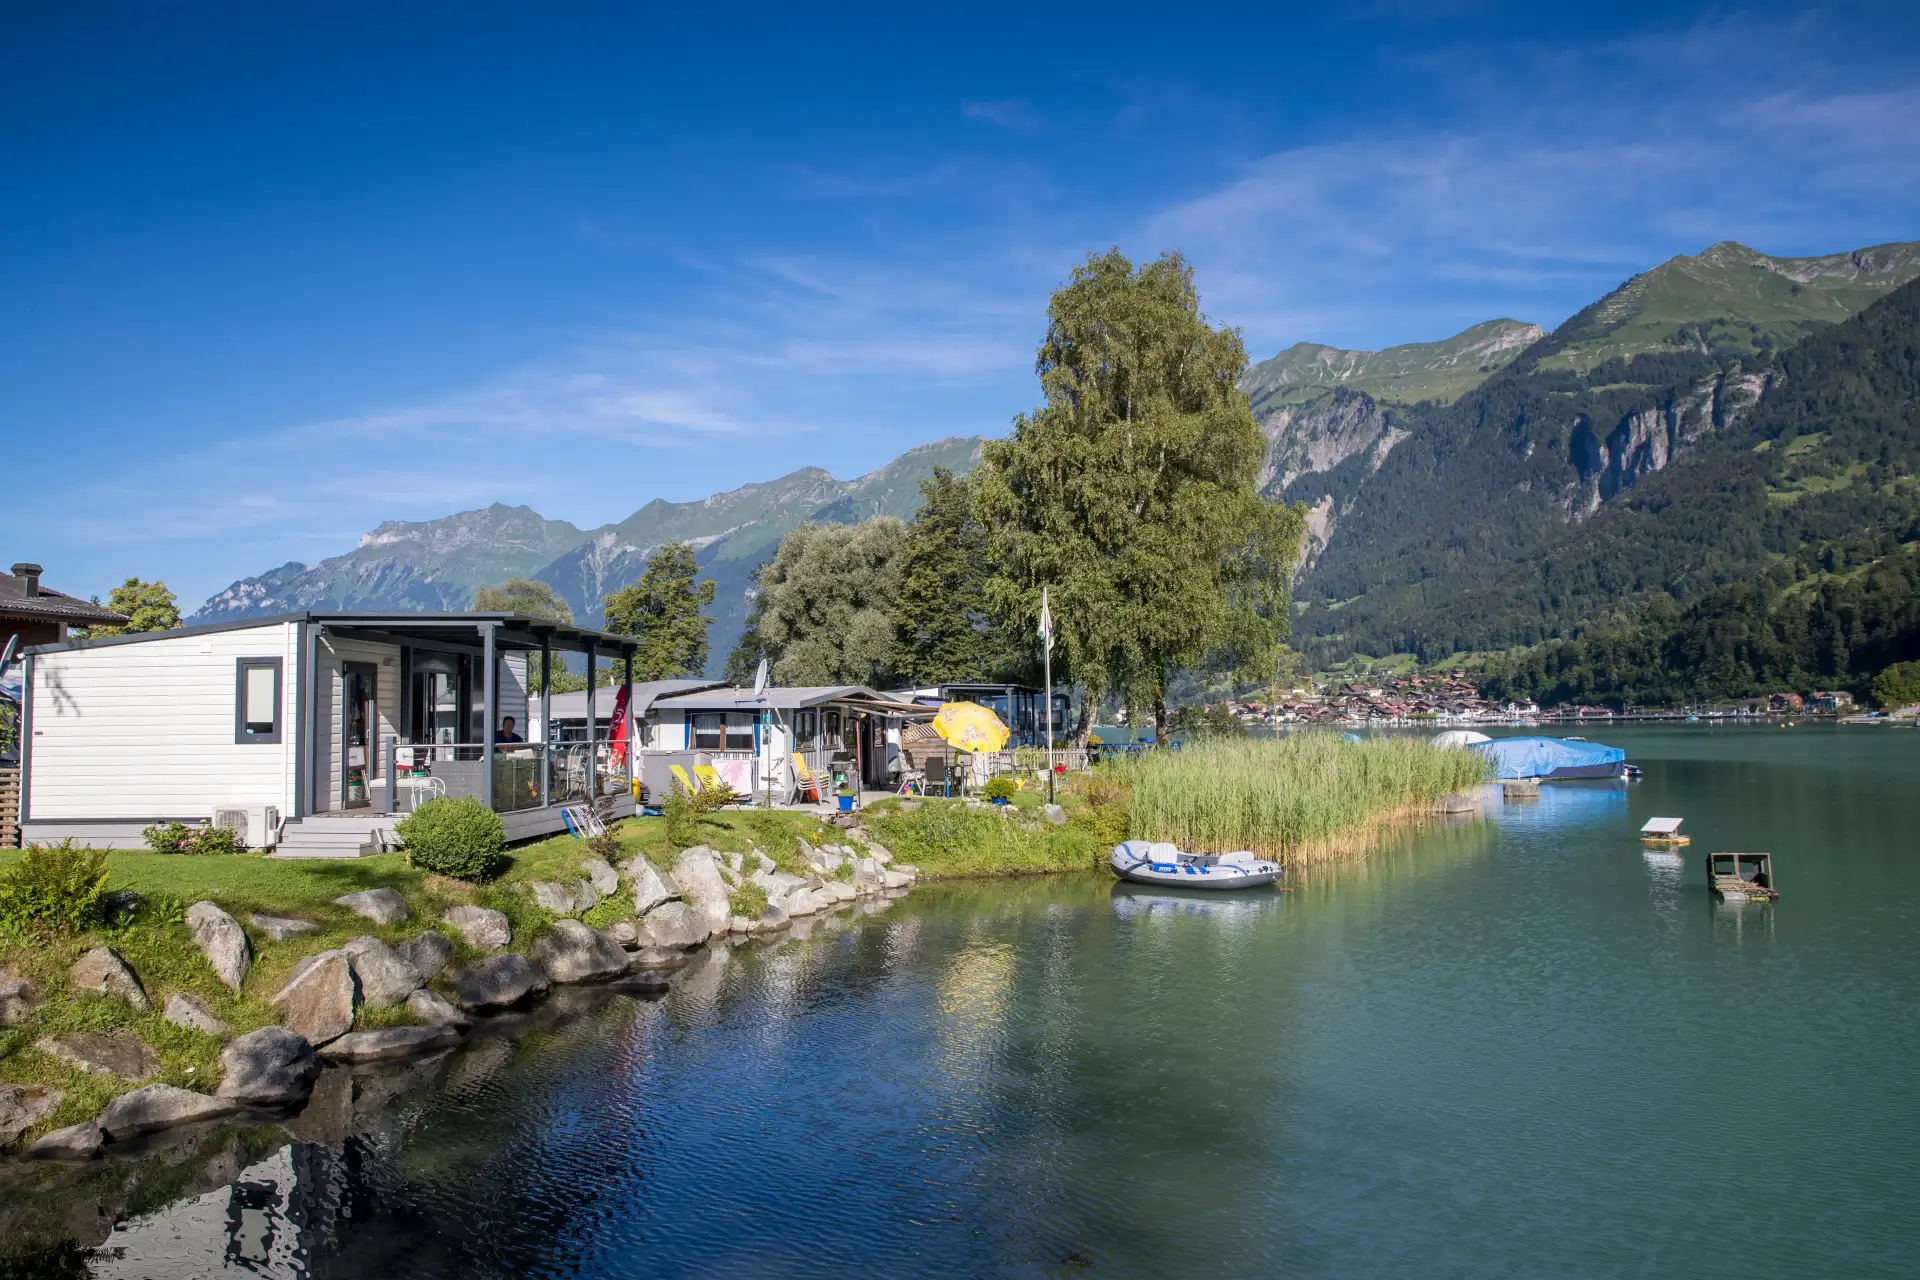 mietobjekte aaregg camping am brienzersee - banner hover